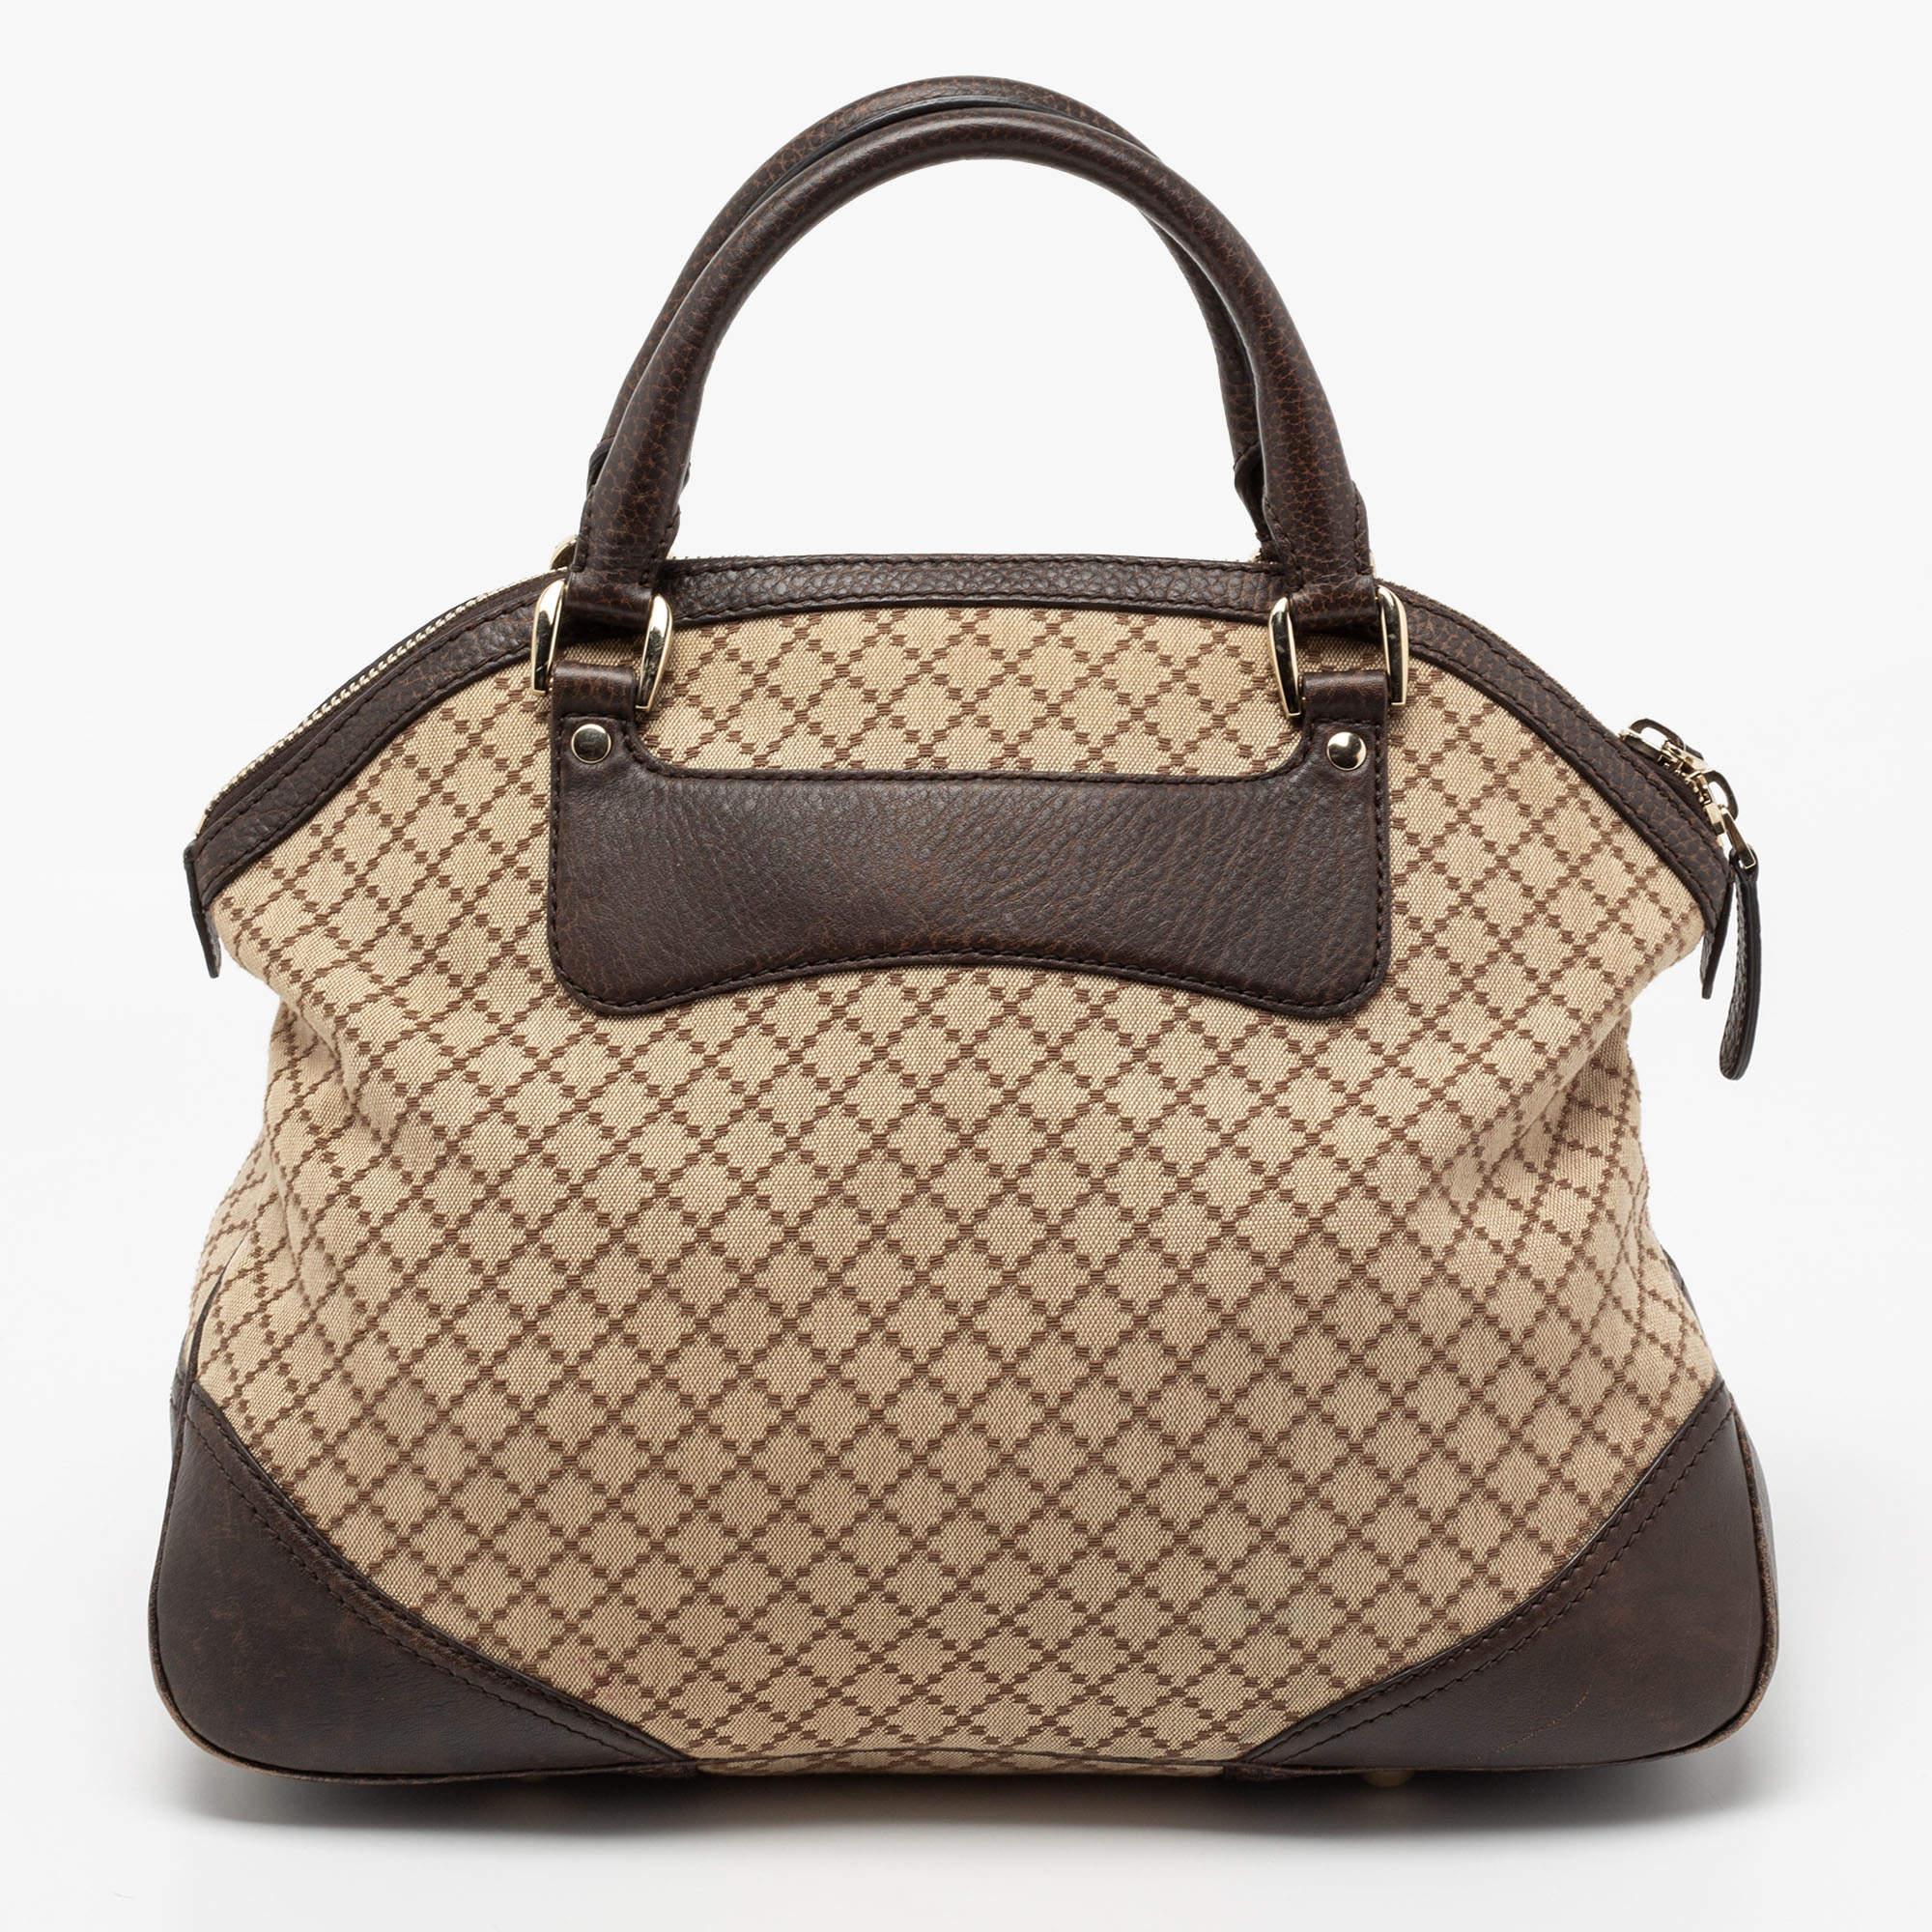 This Gucci Catherine satchel is crafted from beige Diamante canvas and enhanced with brown leather. The bag features dual handles, and the signature Horsebit motif adorns its front. The top zip closure opens to a canvas-lined interior that houses